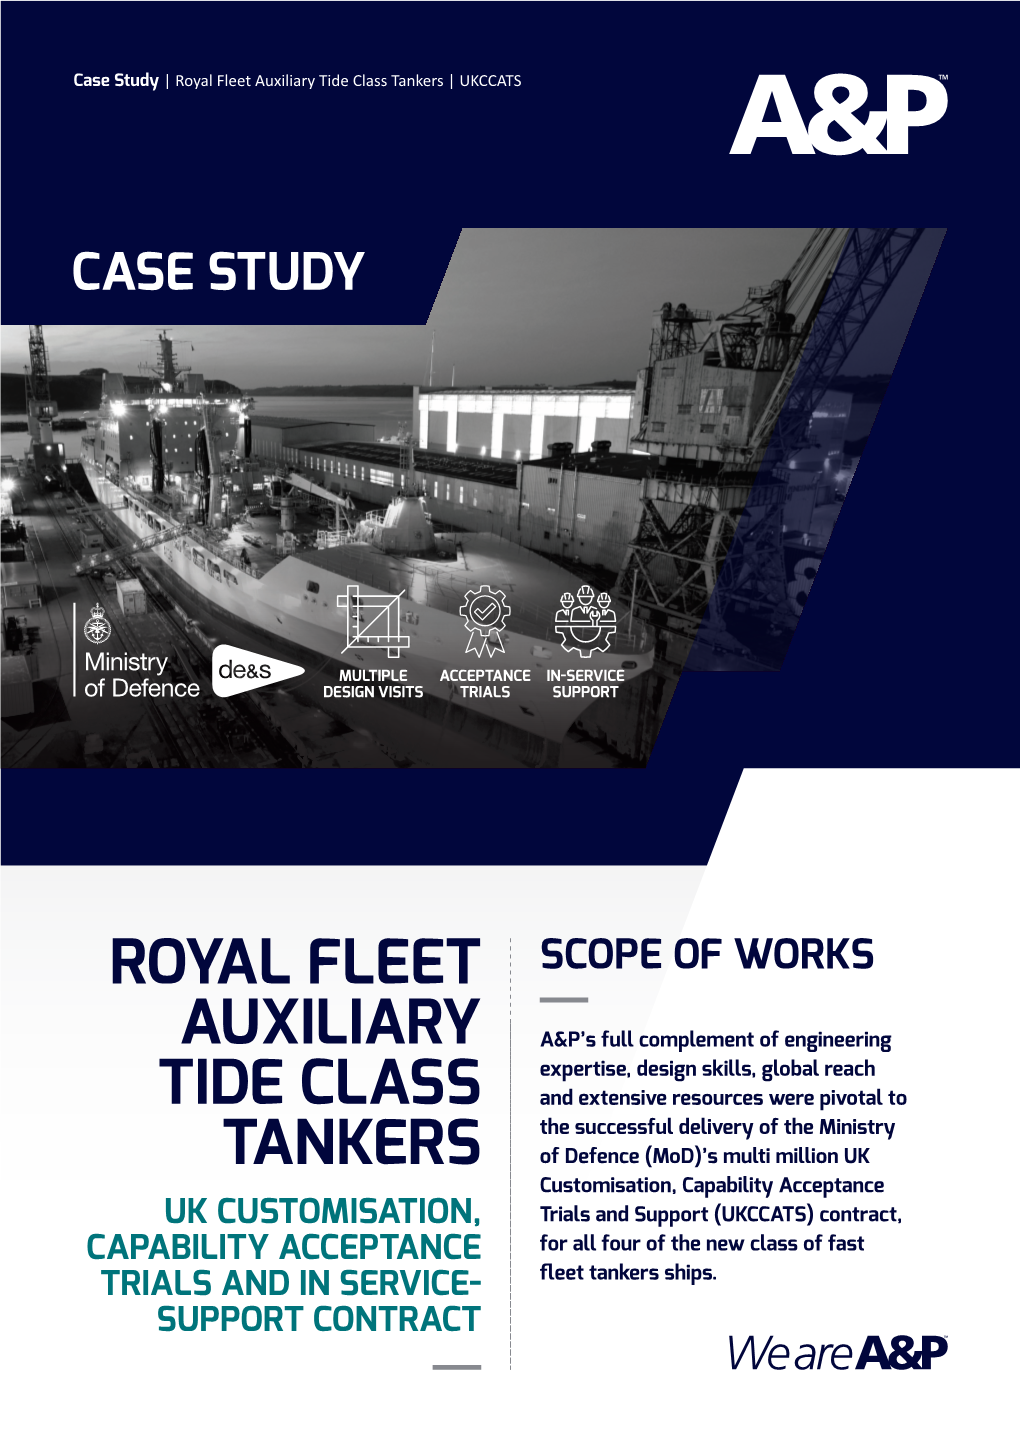 Royal Fleet Auxiliary Tide Class Tankers | UKCCATS